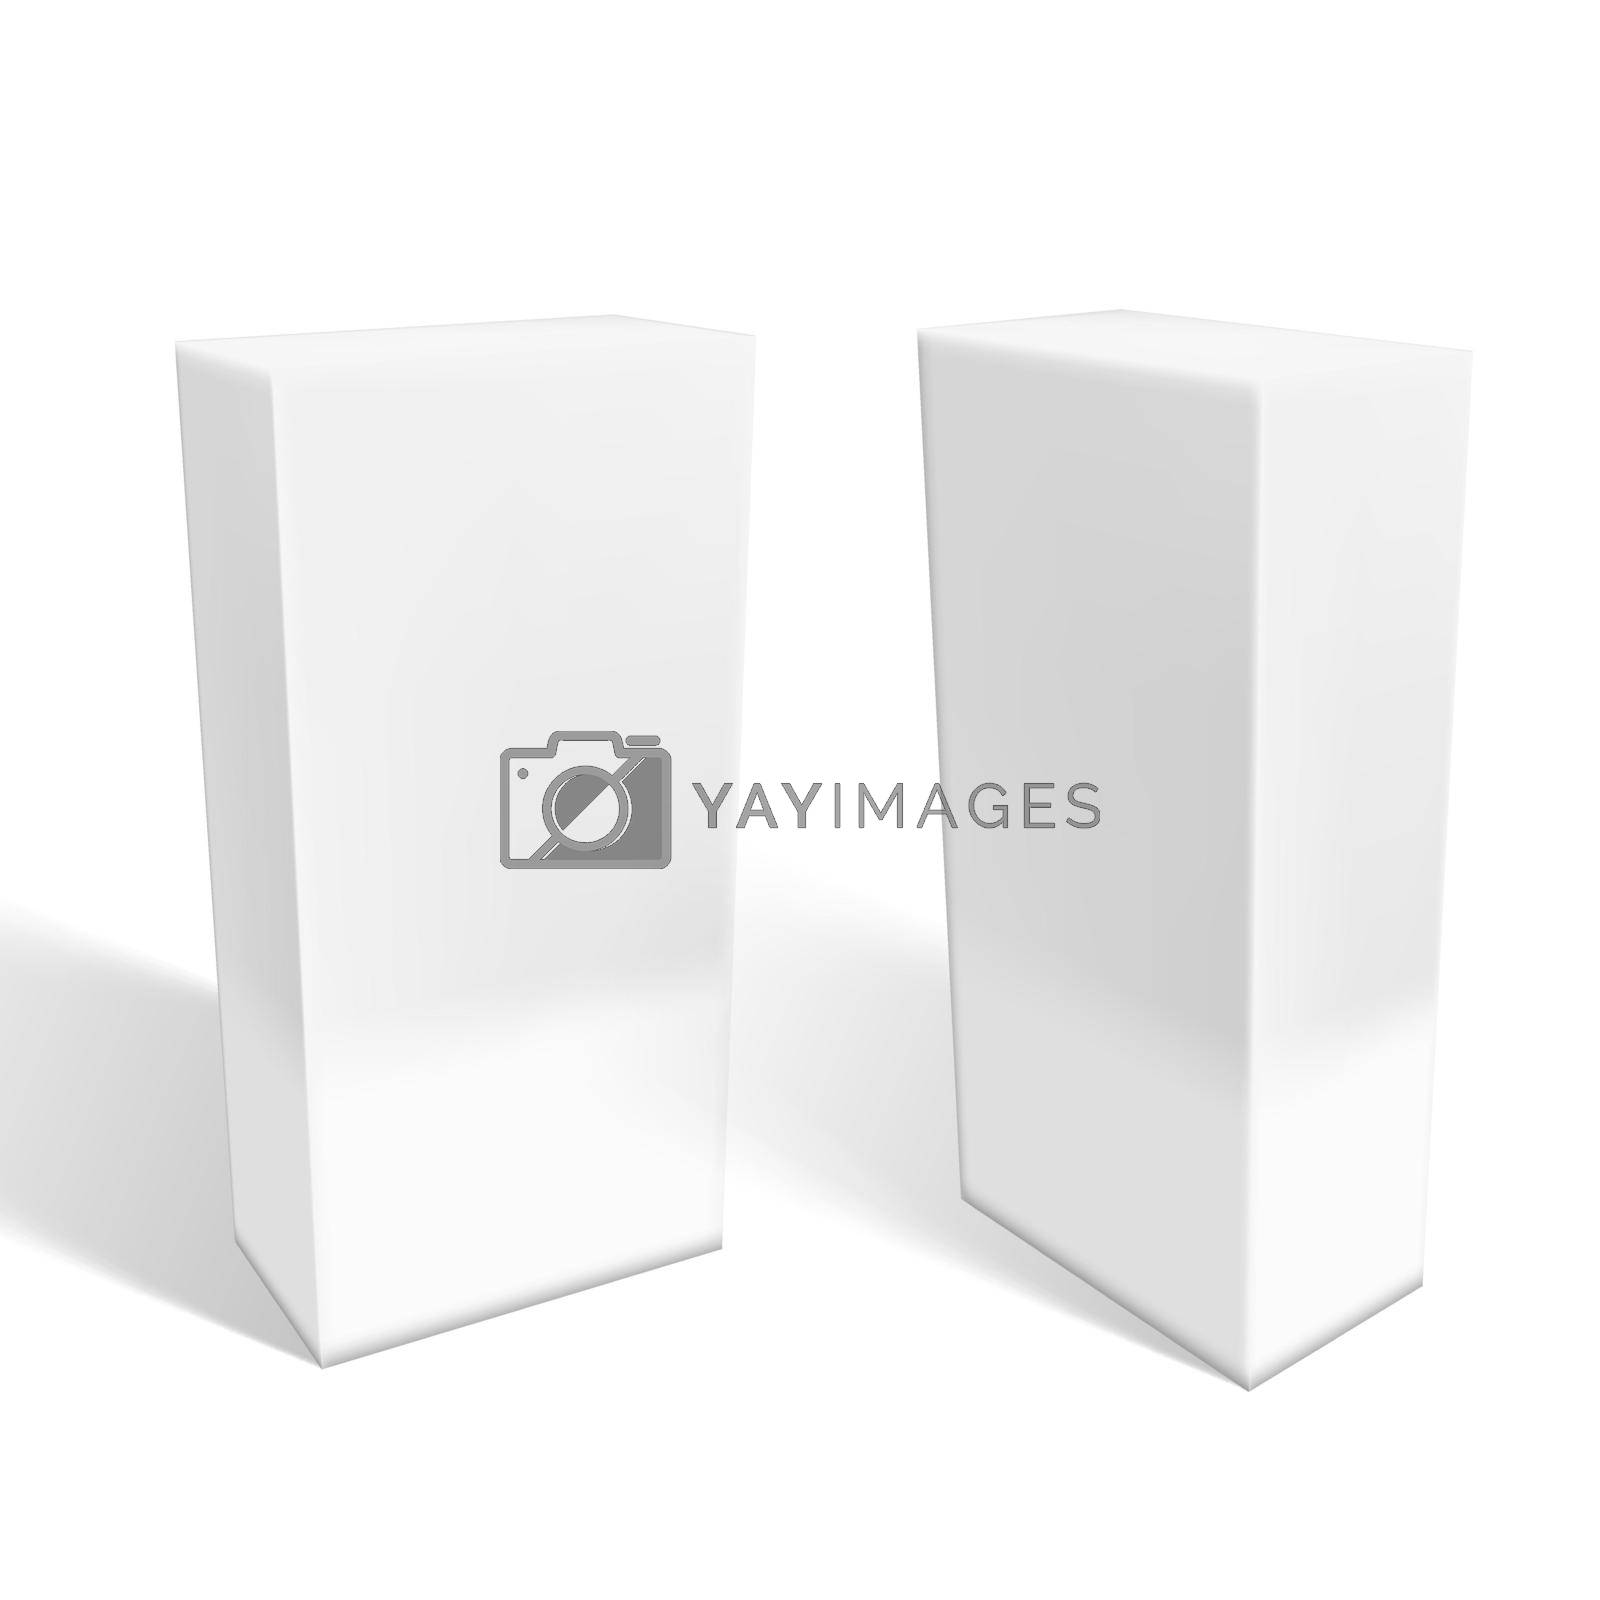 Royalty free image of Set Of Small White Cardboard Boxes With Shadows by VectorThings